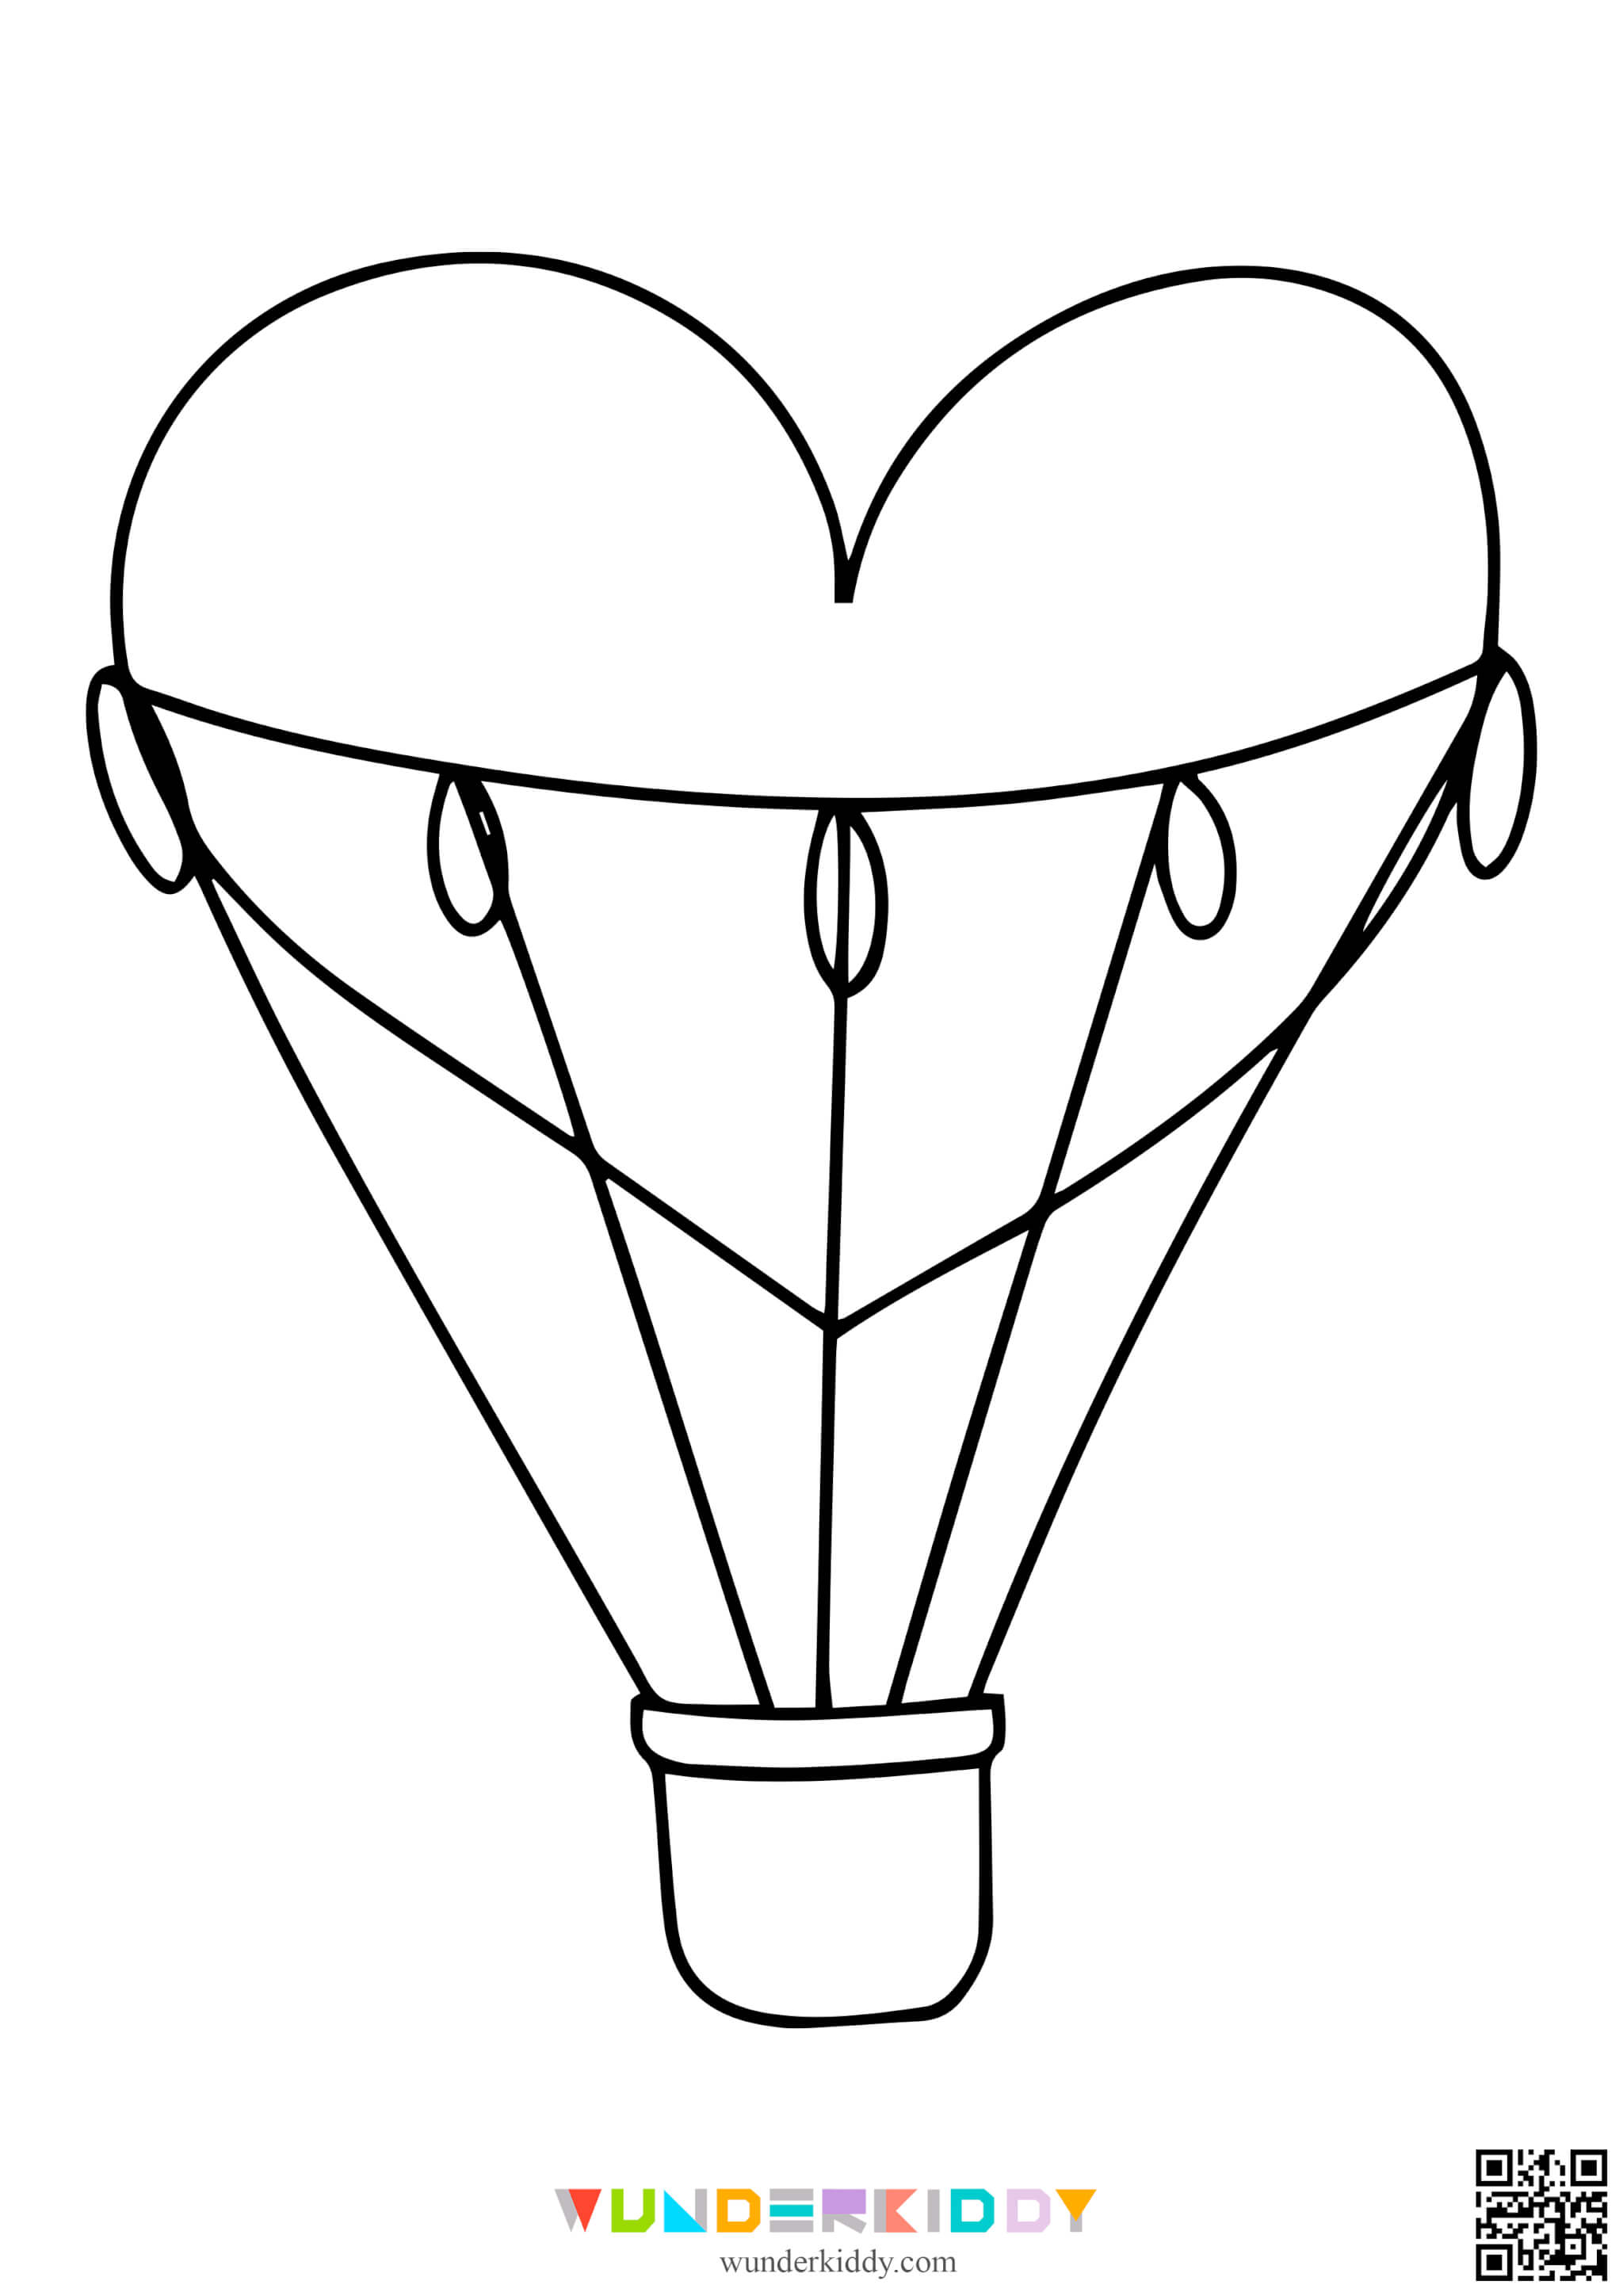 Valentines Coloring Pages - Image 12